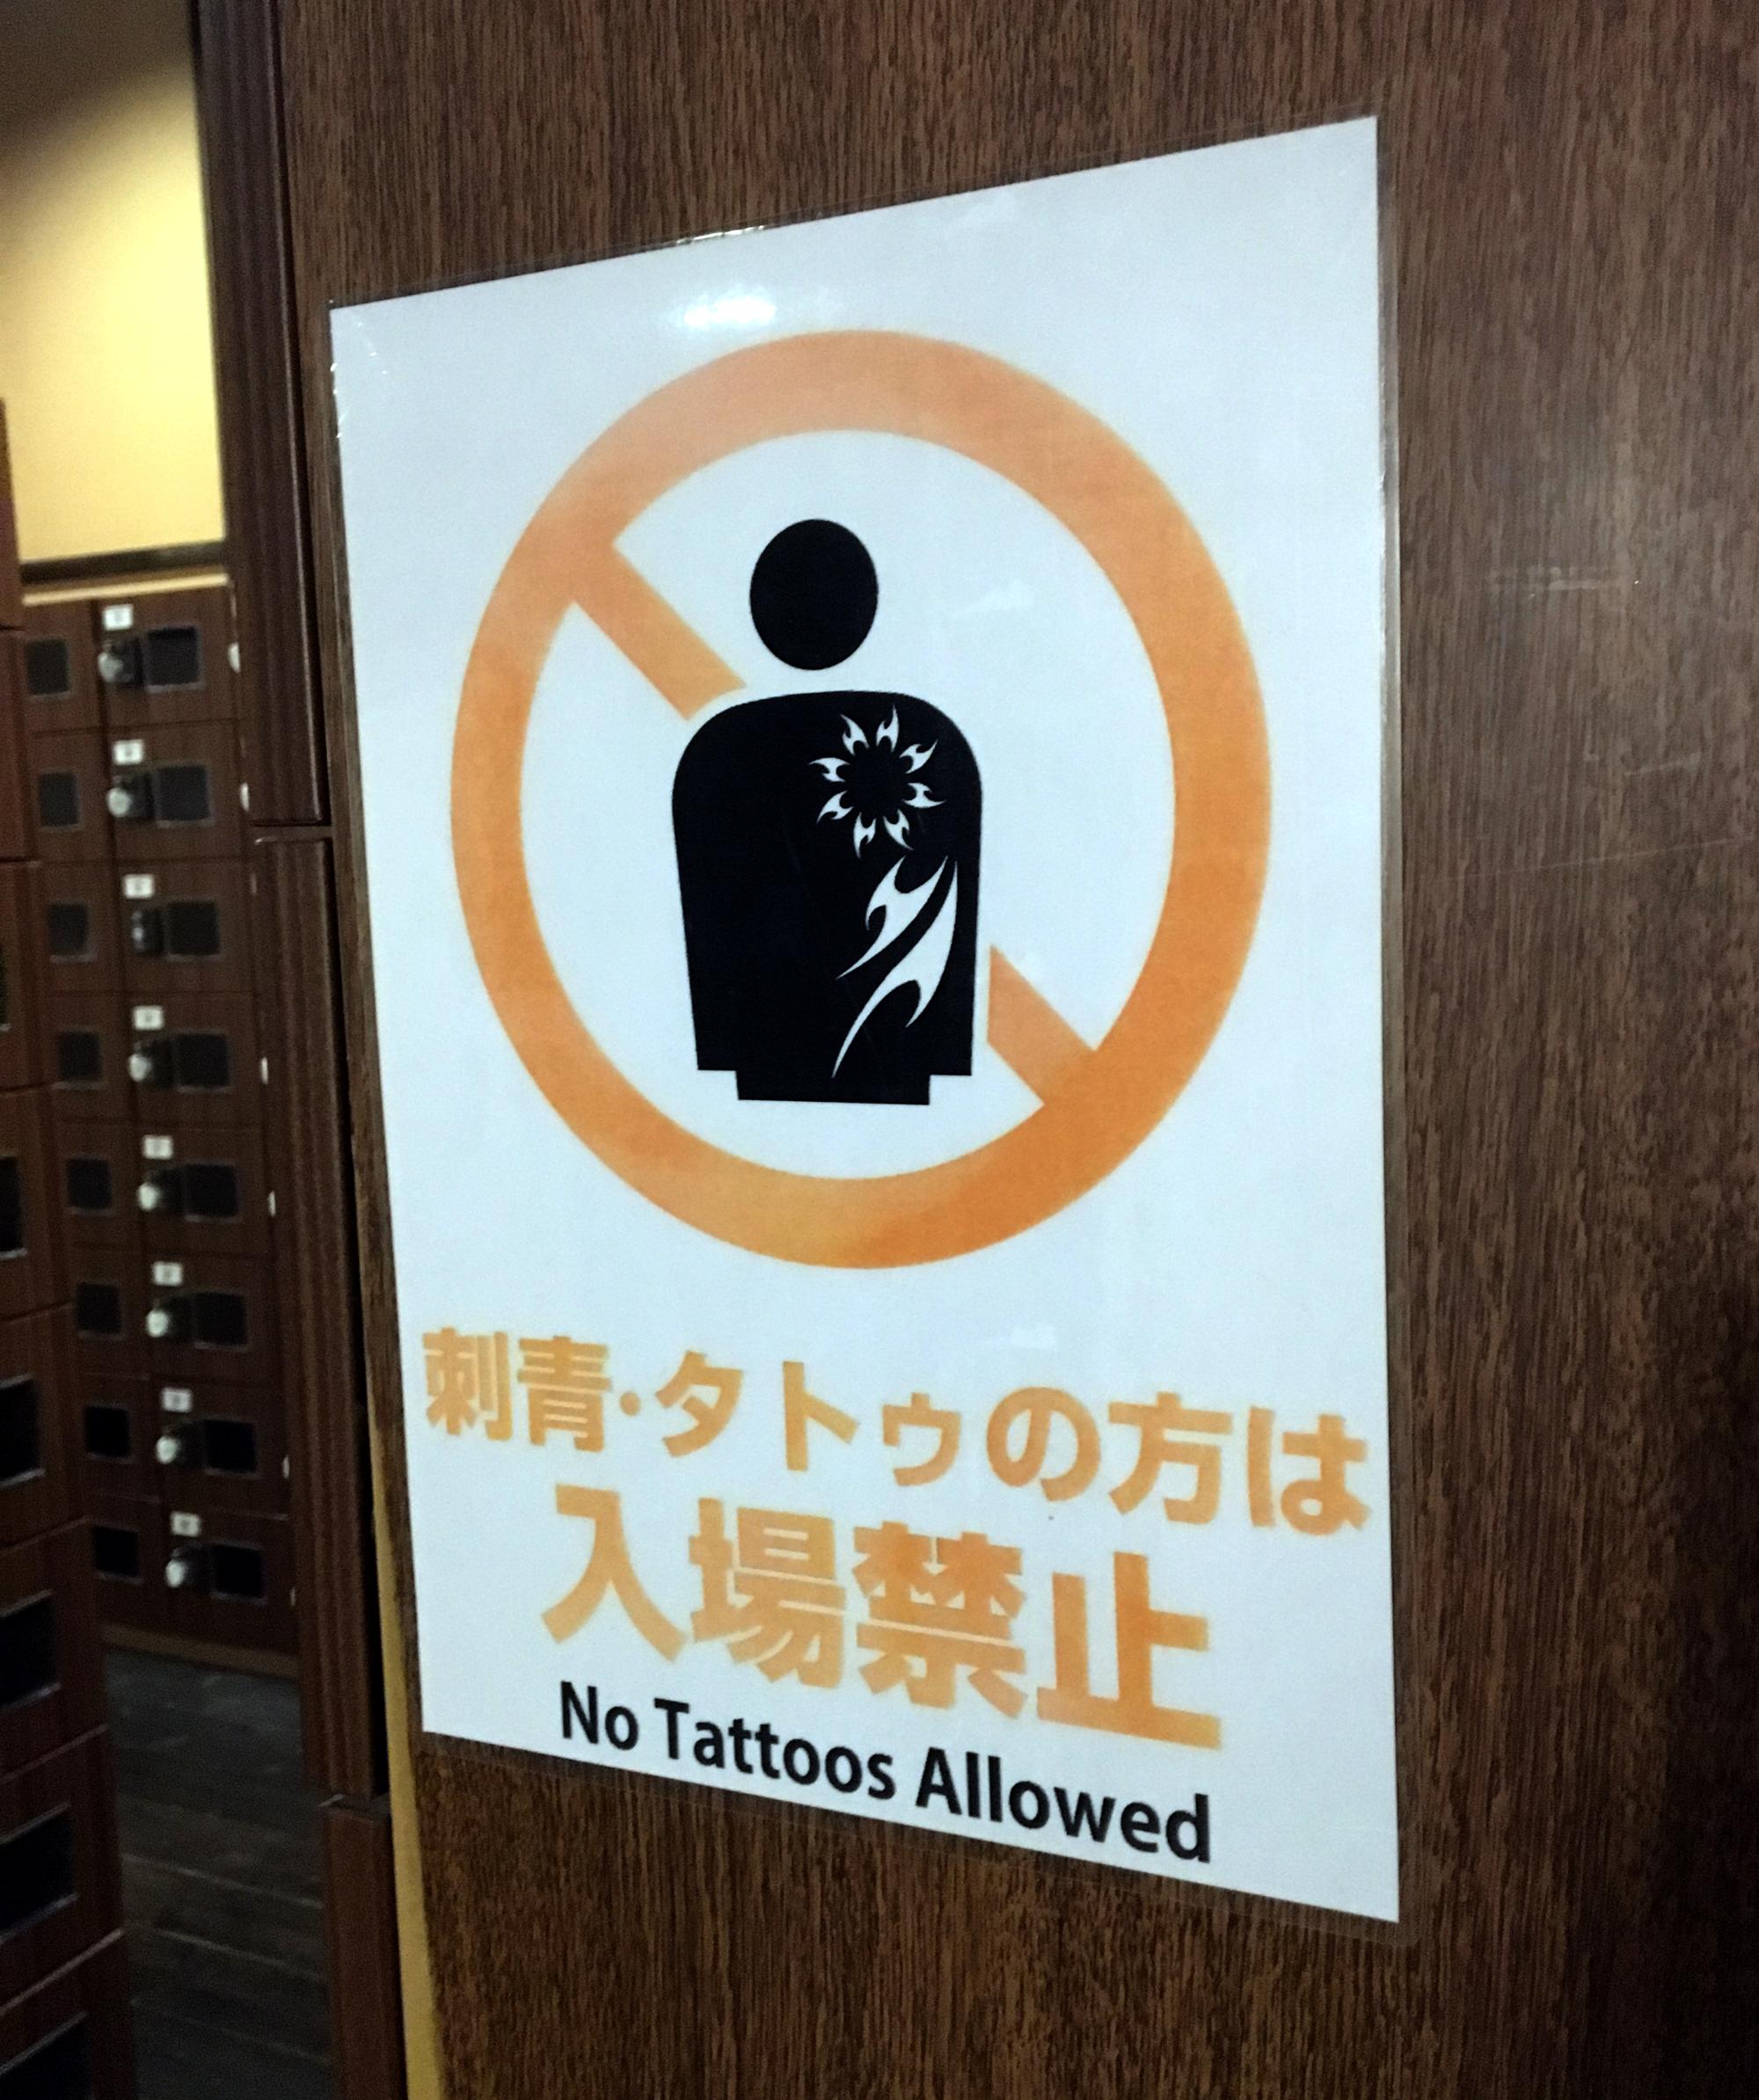 Signs Of Japan - No Tattoos Allowed